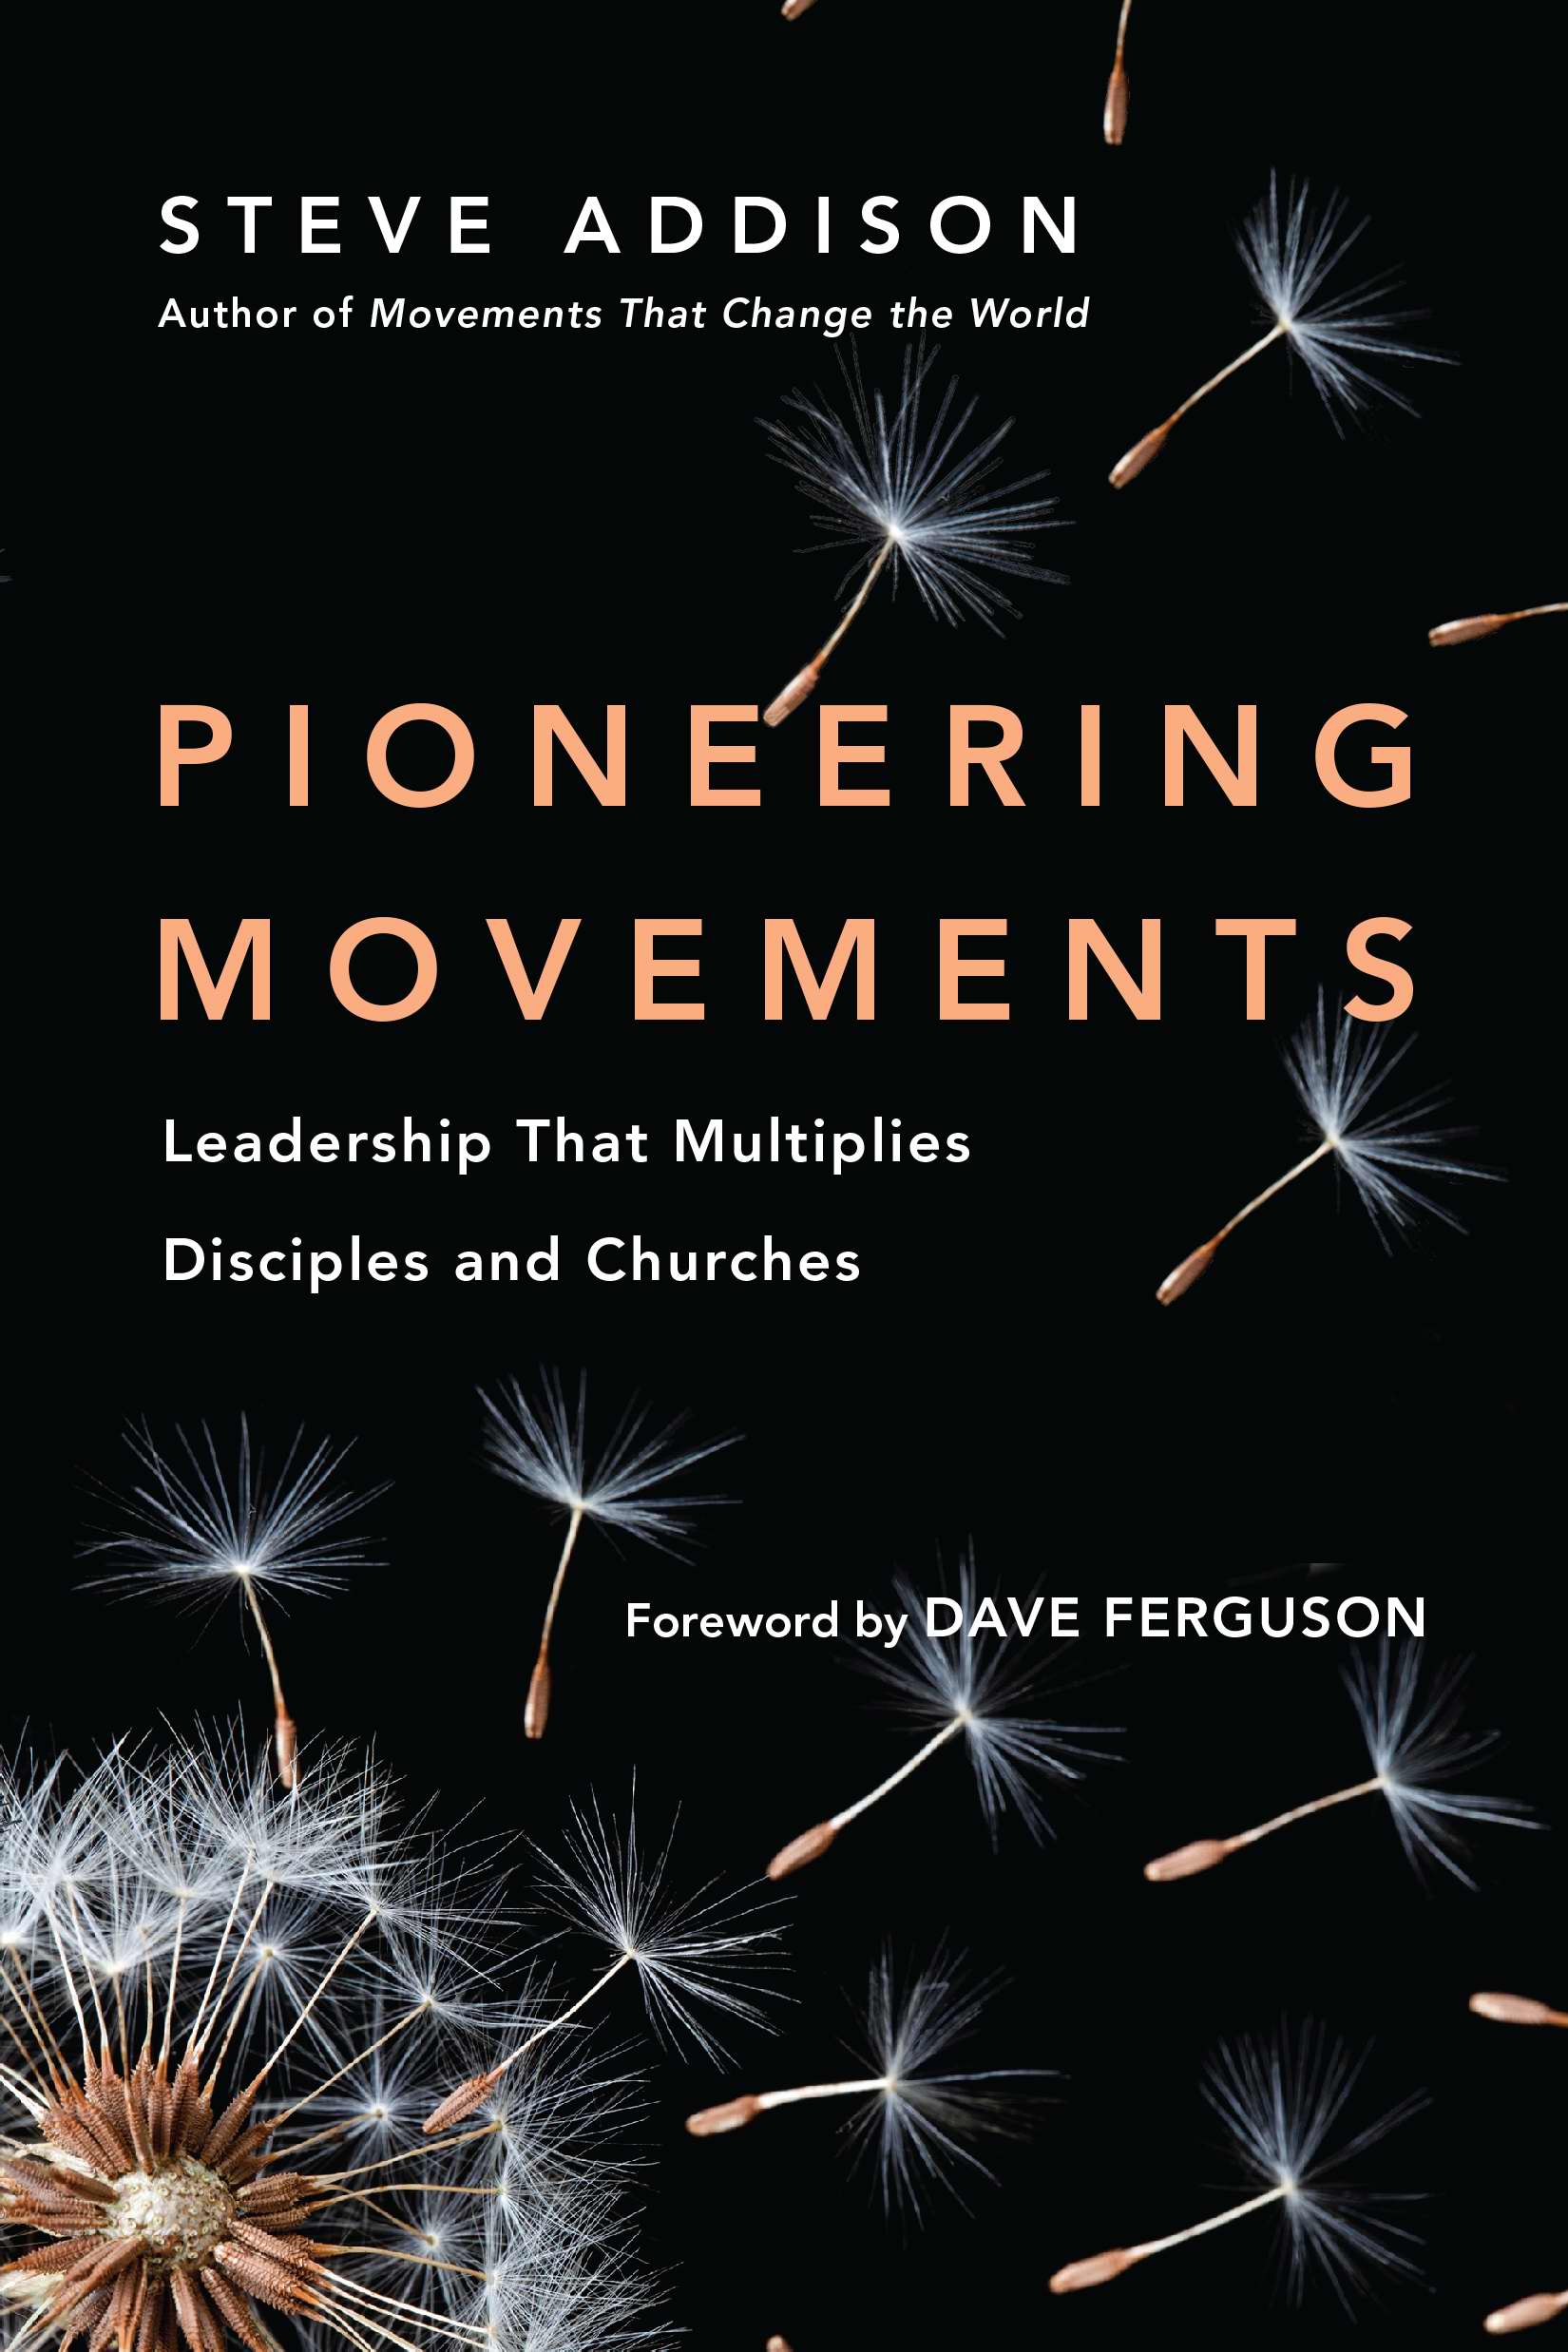 Pioneering Movements by Steve Addison and Dave Ferguson at Eden